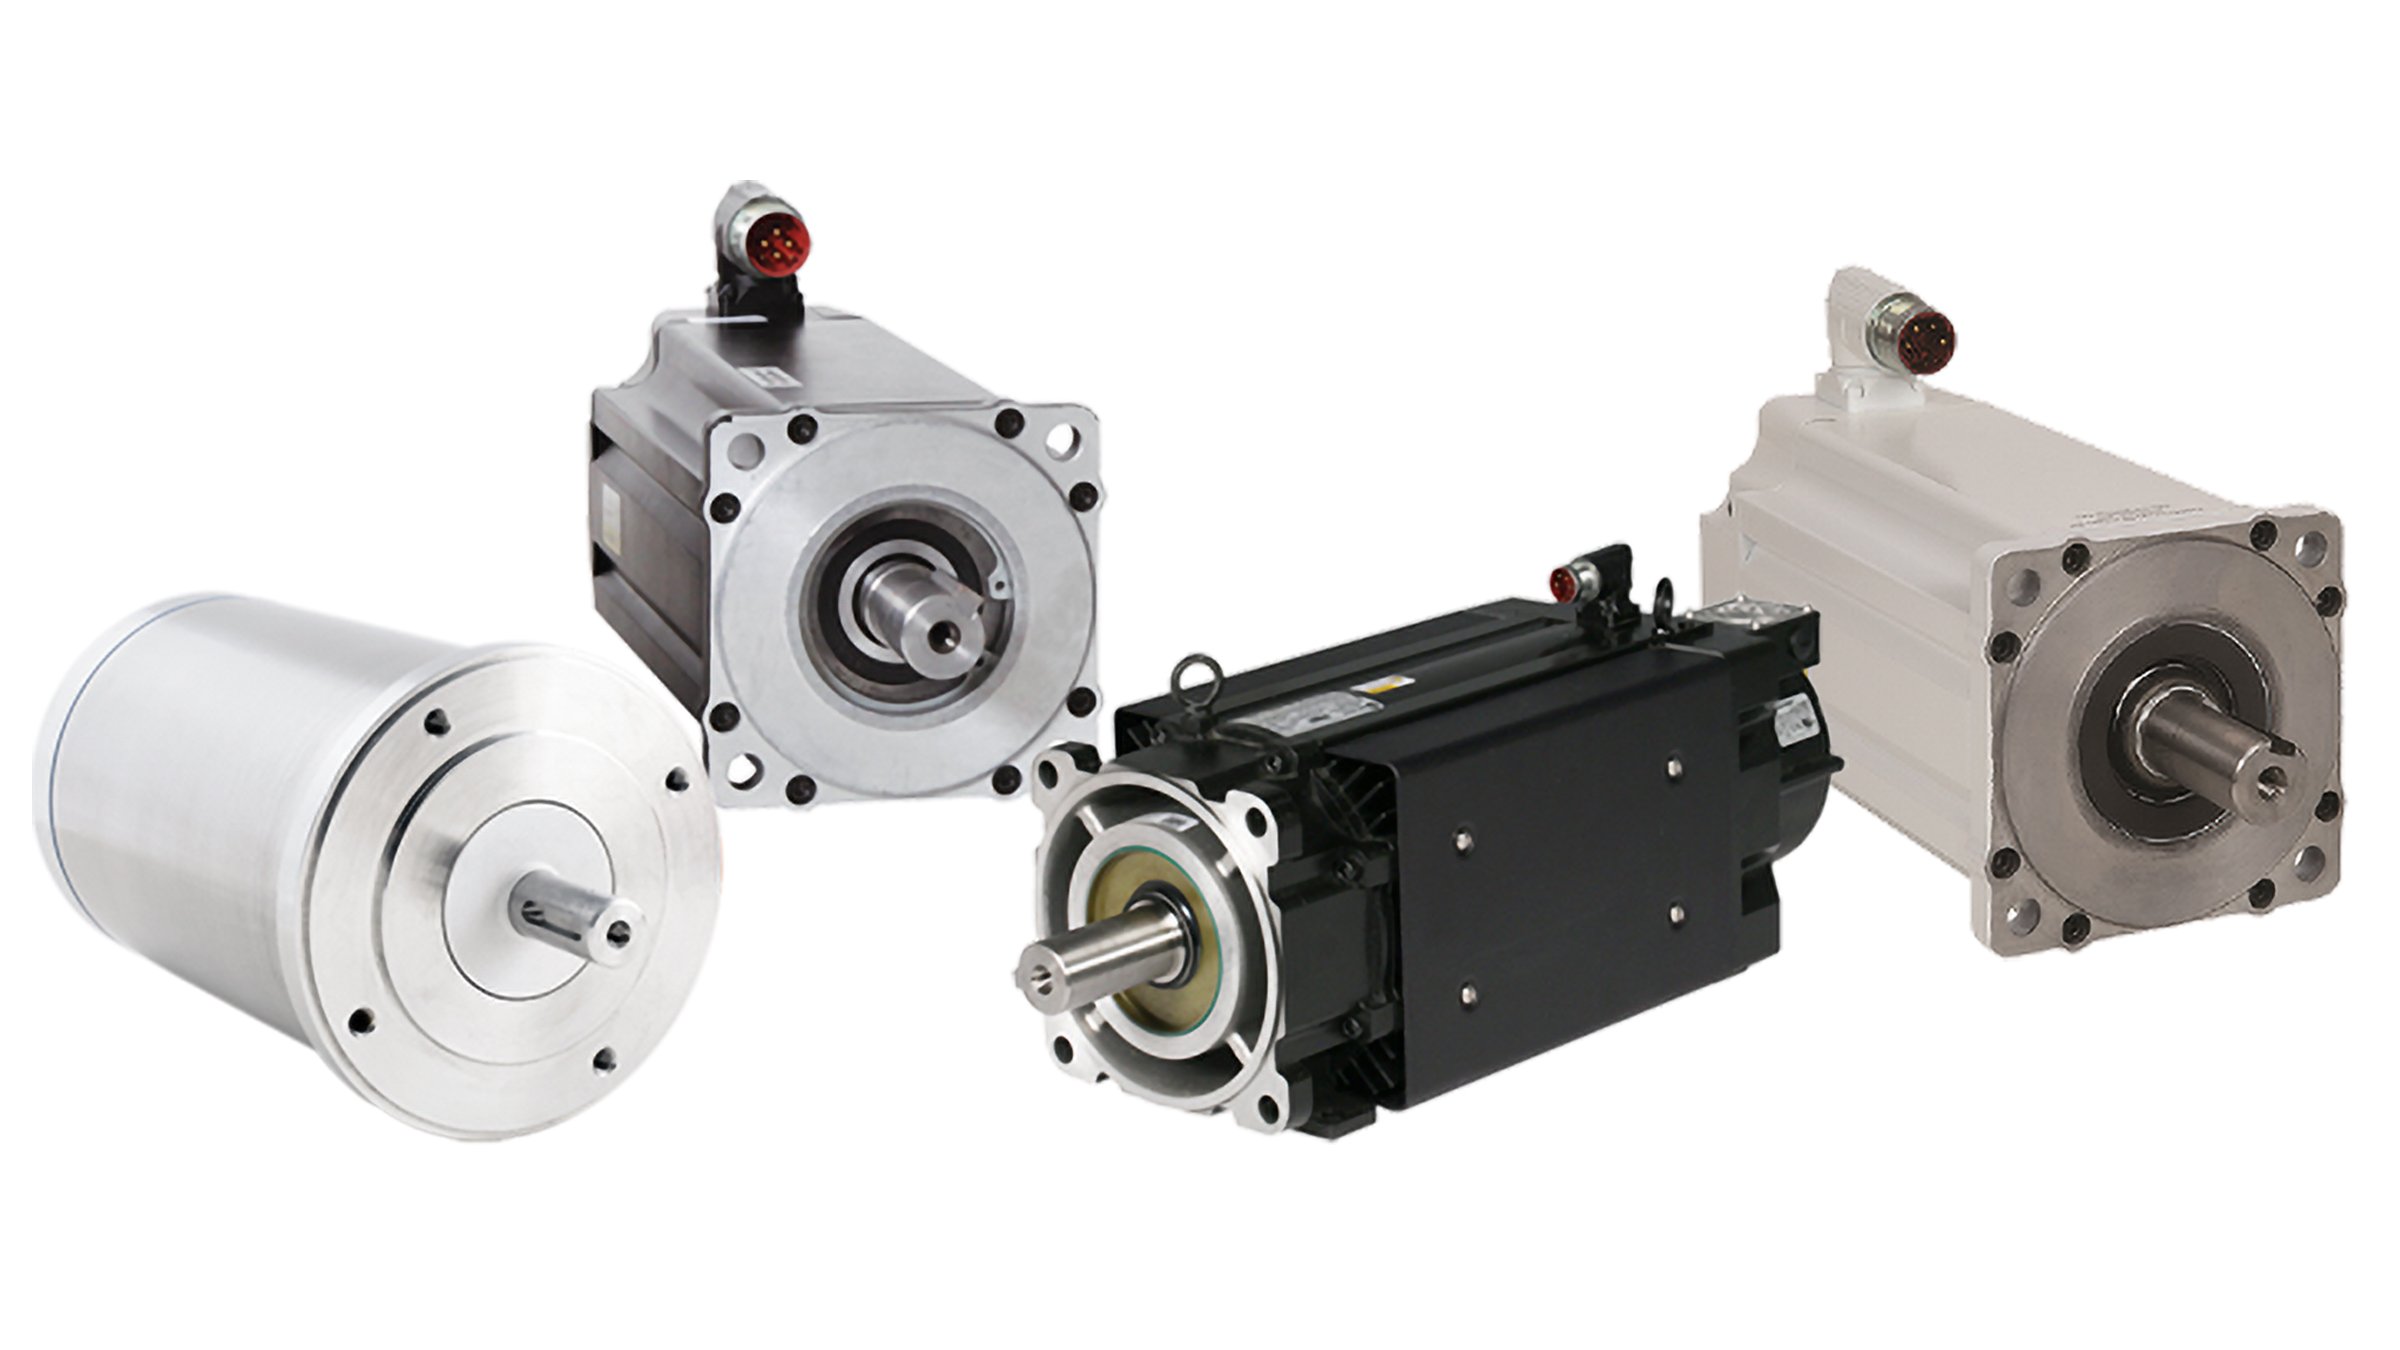 Allen‑Bradley Kinetix® VP-Series Servo Motors provide smooth, integrated motion control over EtherNet/IP networks and are optimized to run with the Kinetix 5500 and 5700 servo drives.